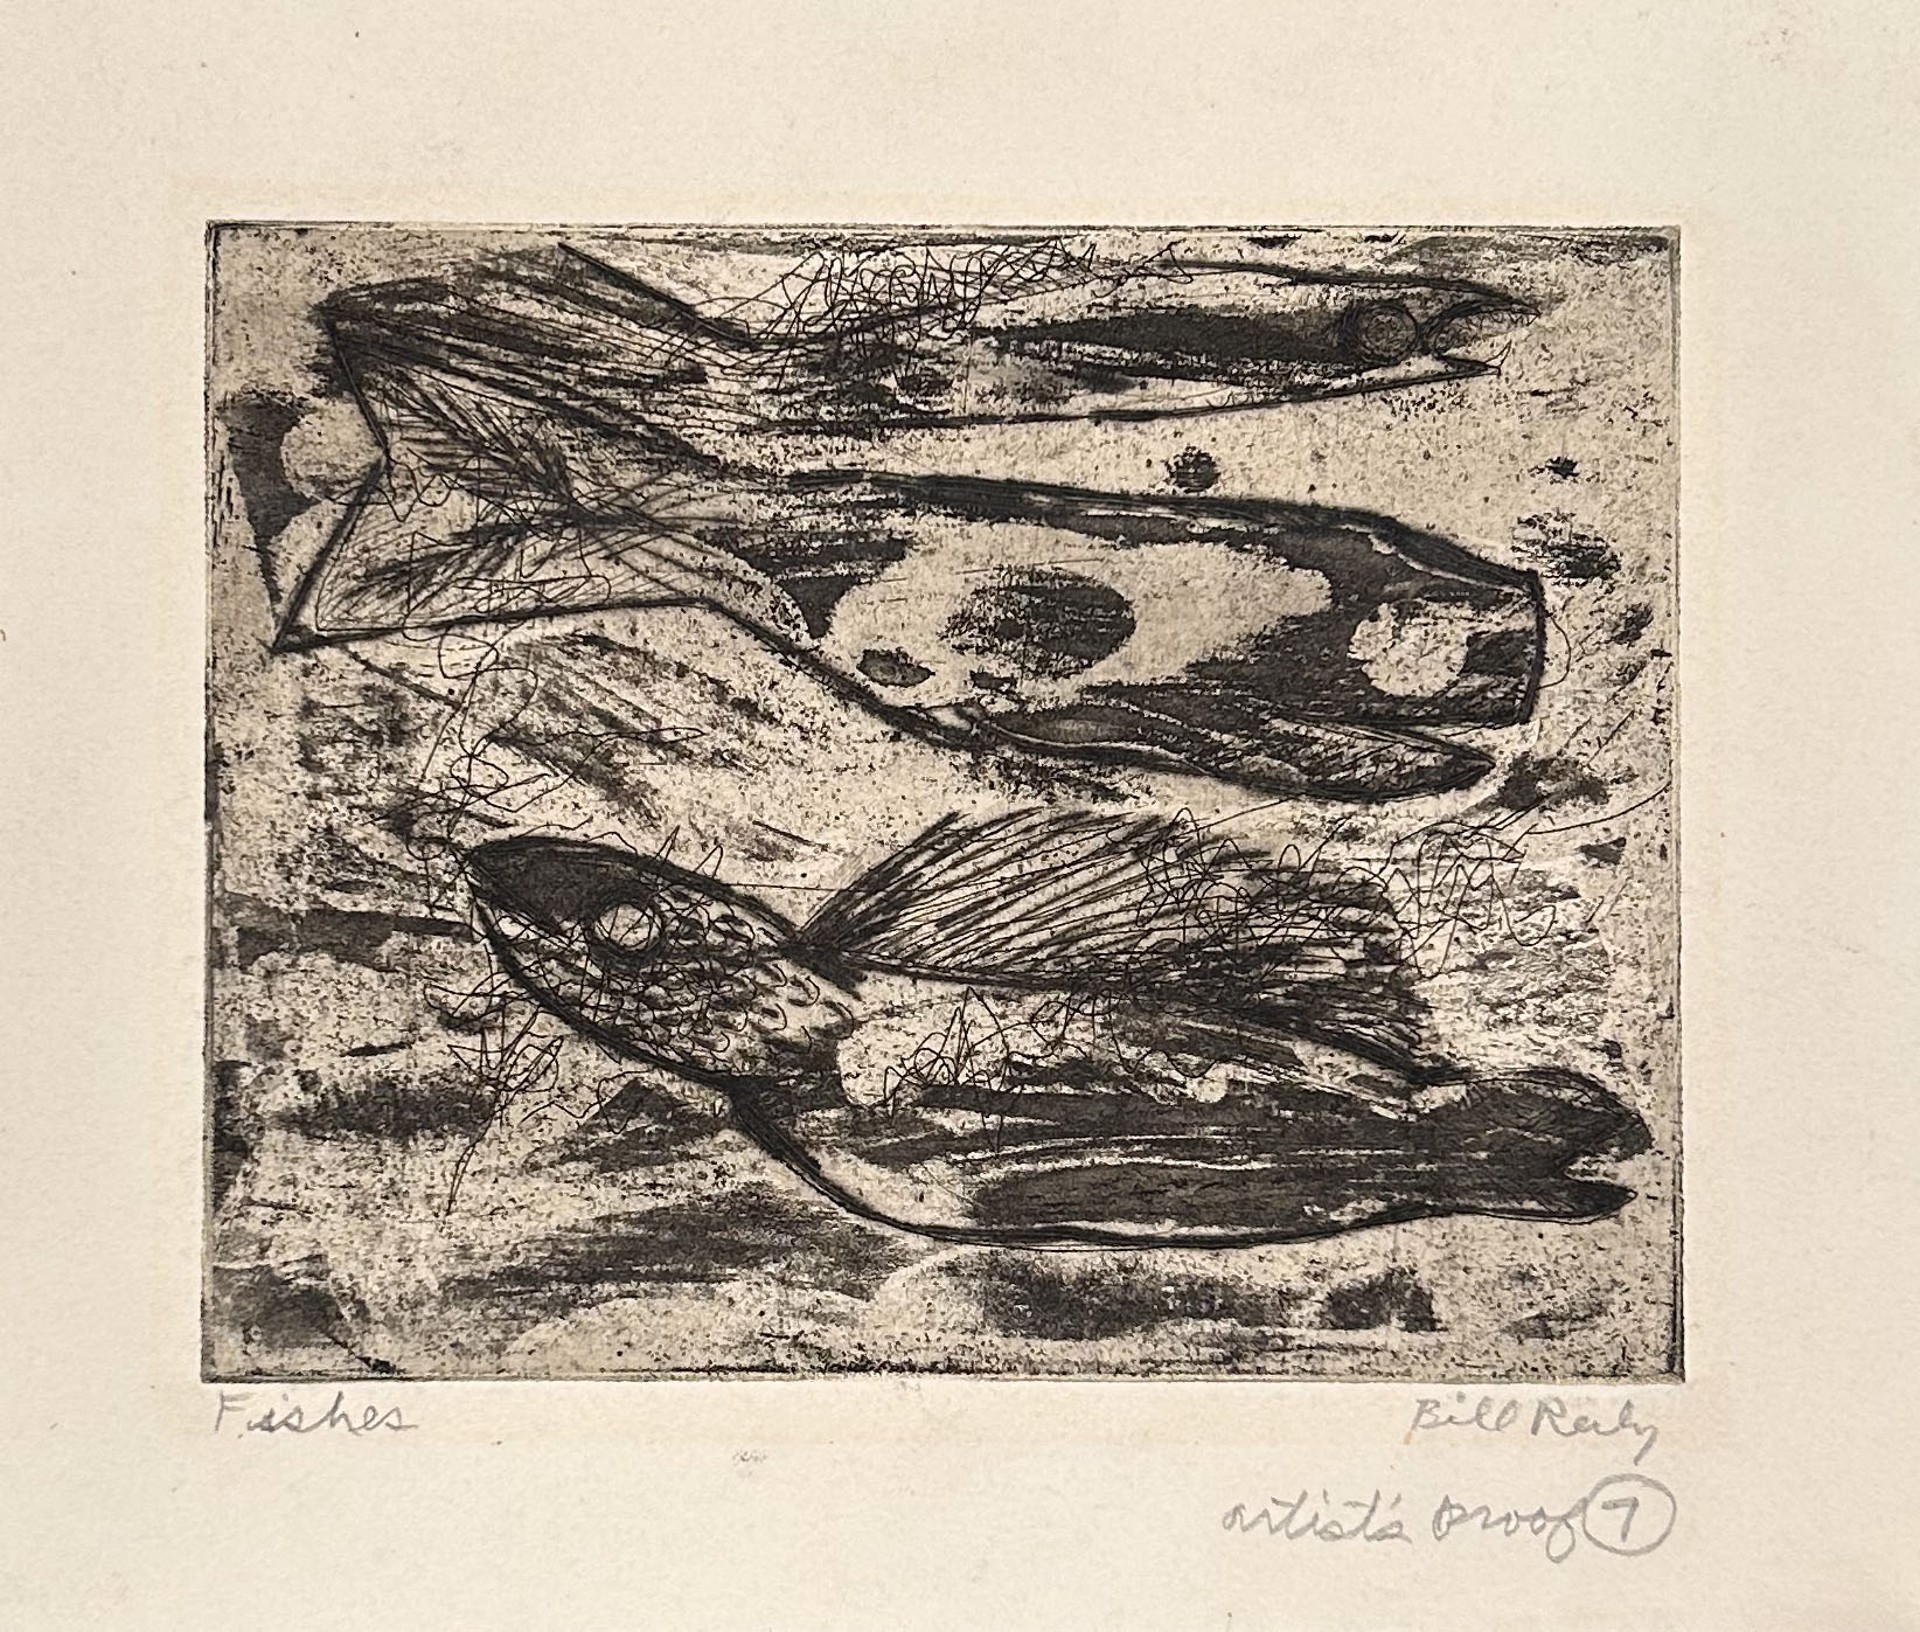 7. Fishes (Artist's proof #7) by Bill Reily - Prints